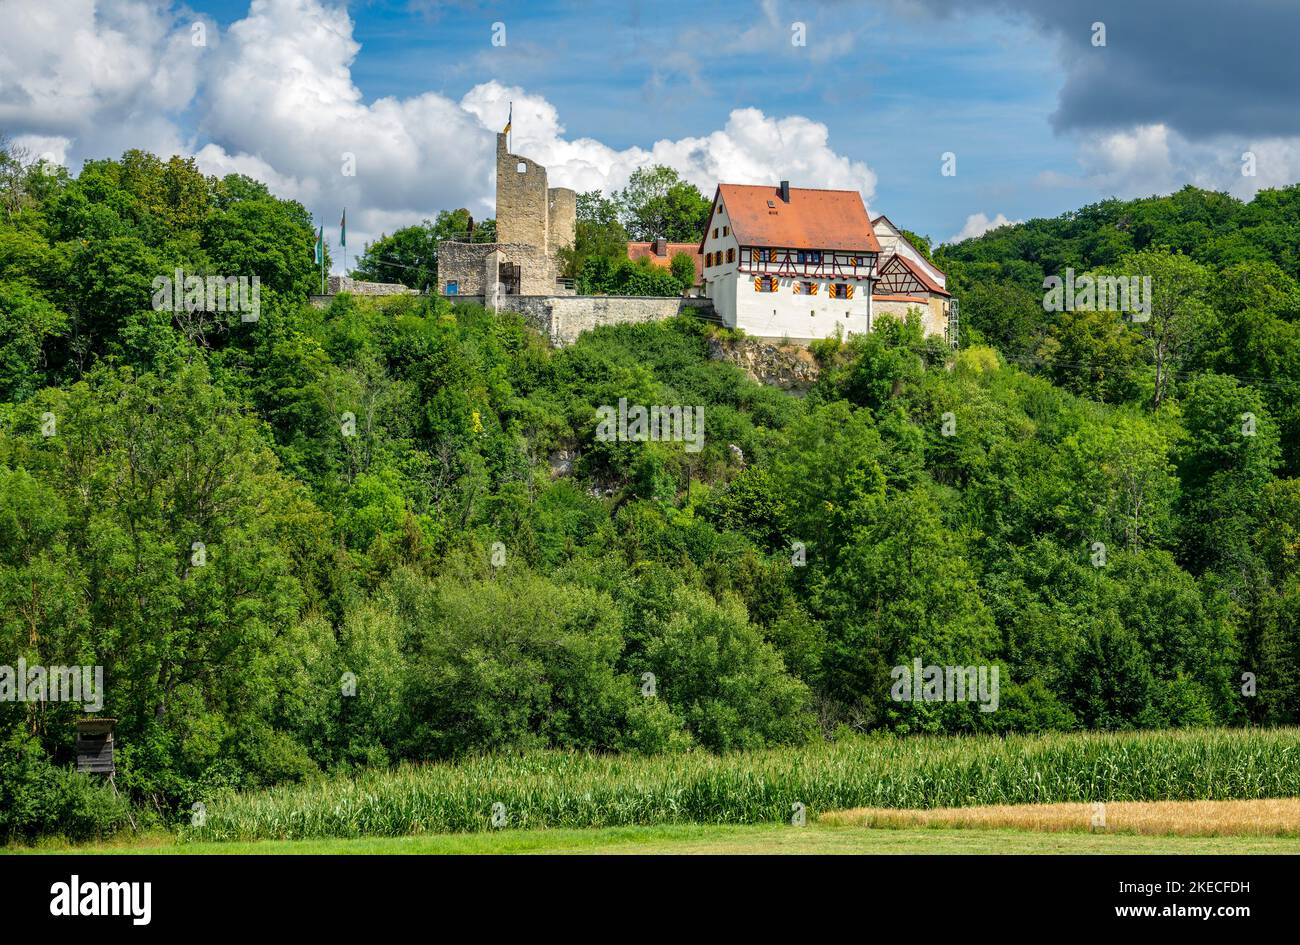 The castle Derneck (14th century) is used today by the Swabian Alb Association as a hiking home. The castle is located in the Lauter valley on the Schwäbische-Alb-Südrand-Weg and is a popular hiking destination. Stock Photo